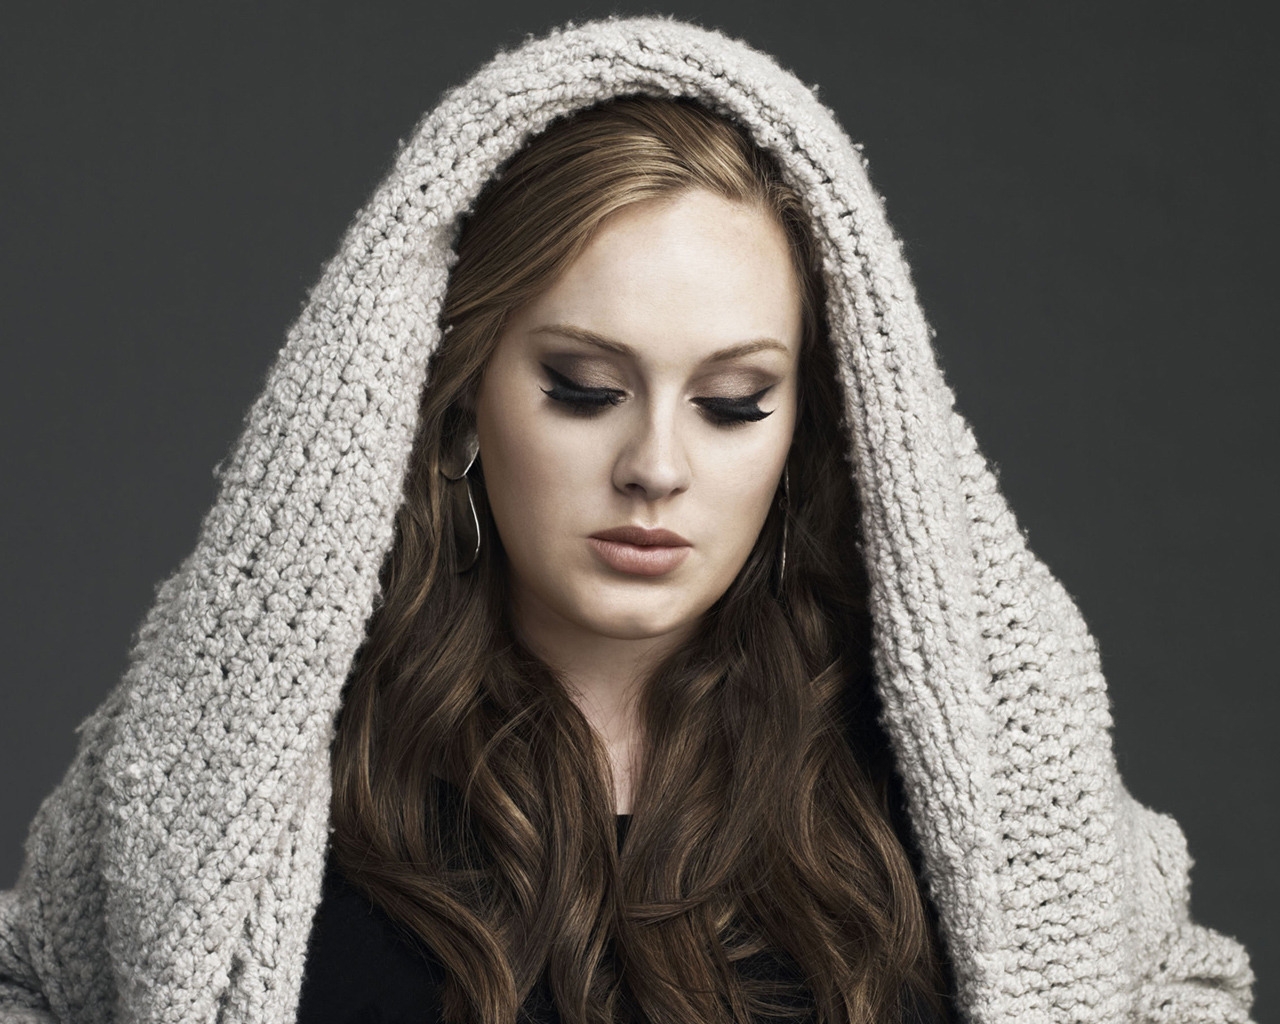 Beautiful Adele for 1280 x 1024 resolution